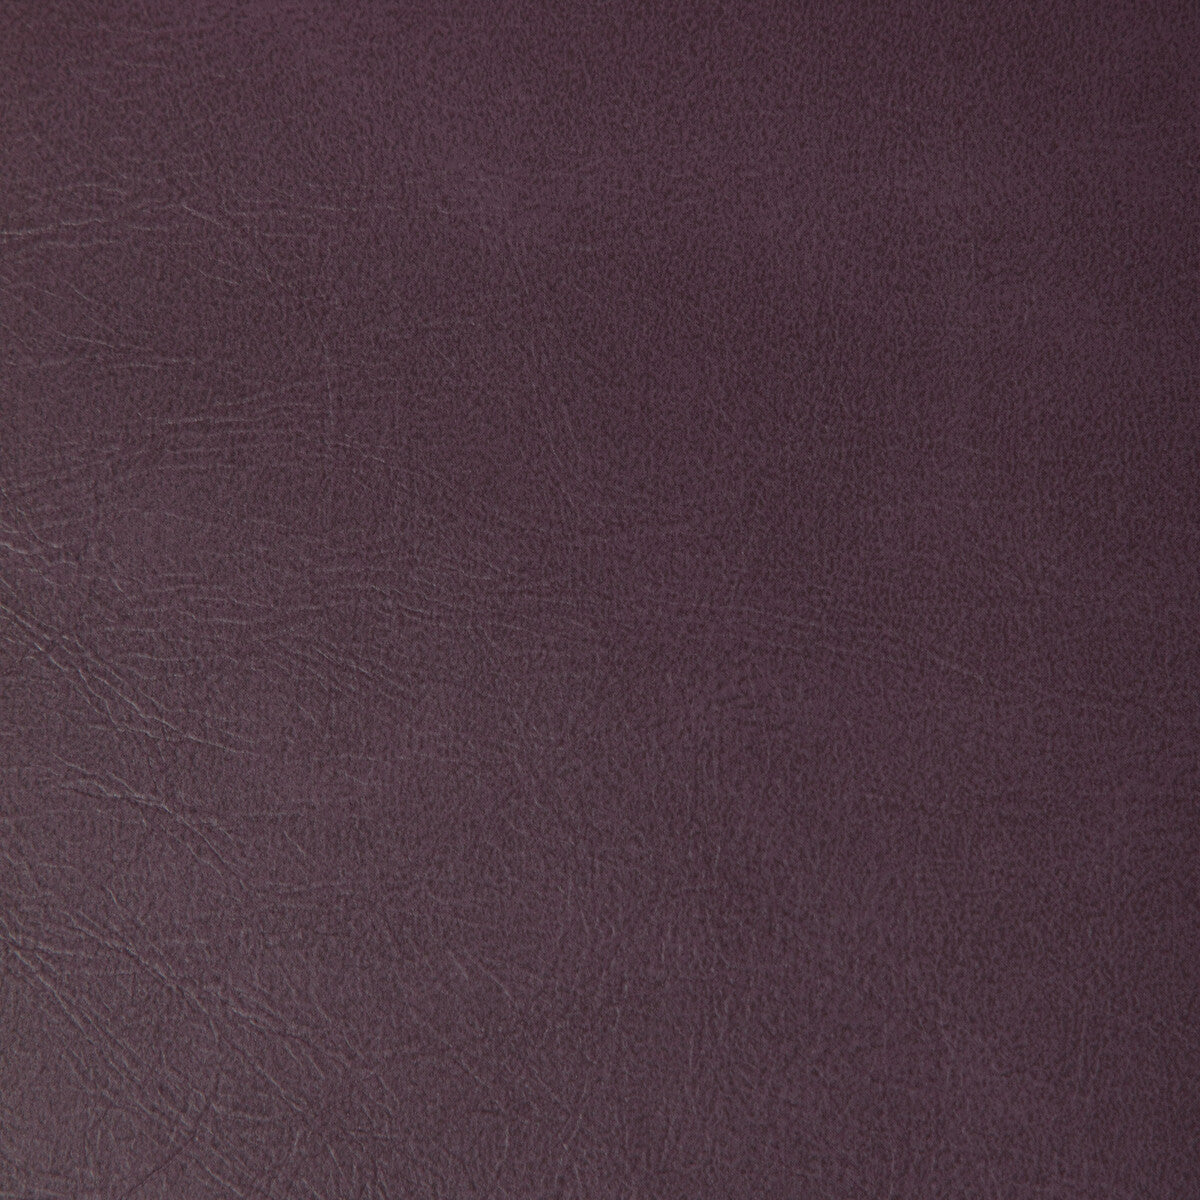 Rambler fabric in aubergine color - pattern RAMBLER.10.0 - by Kravet Contract